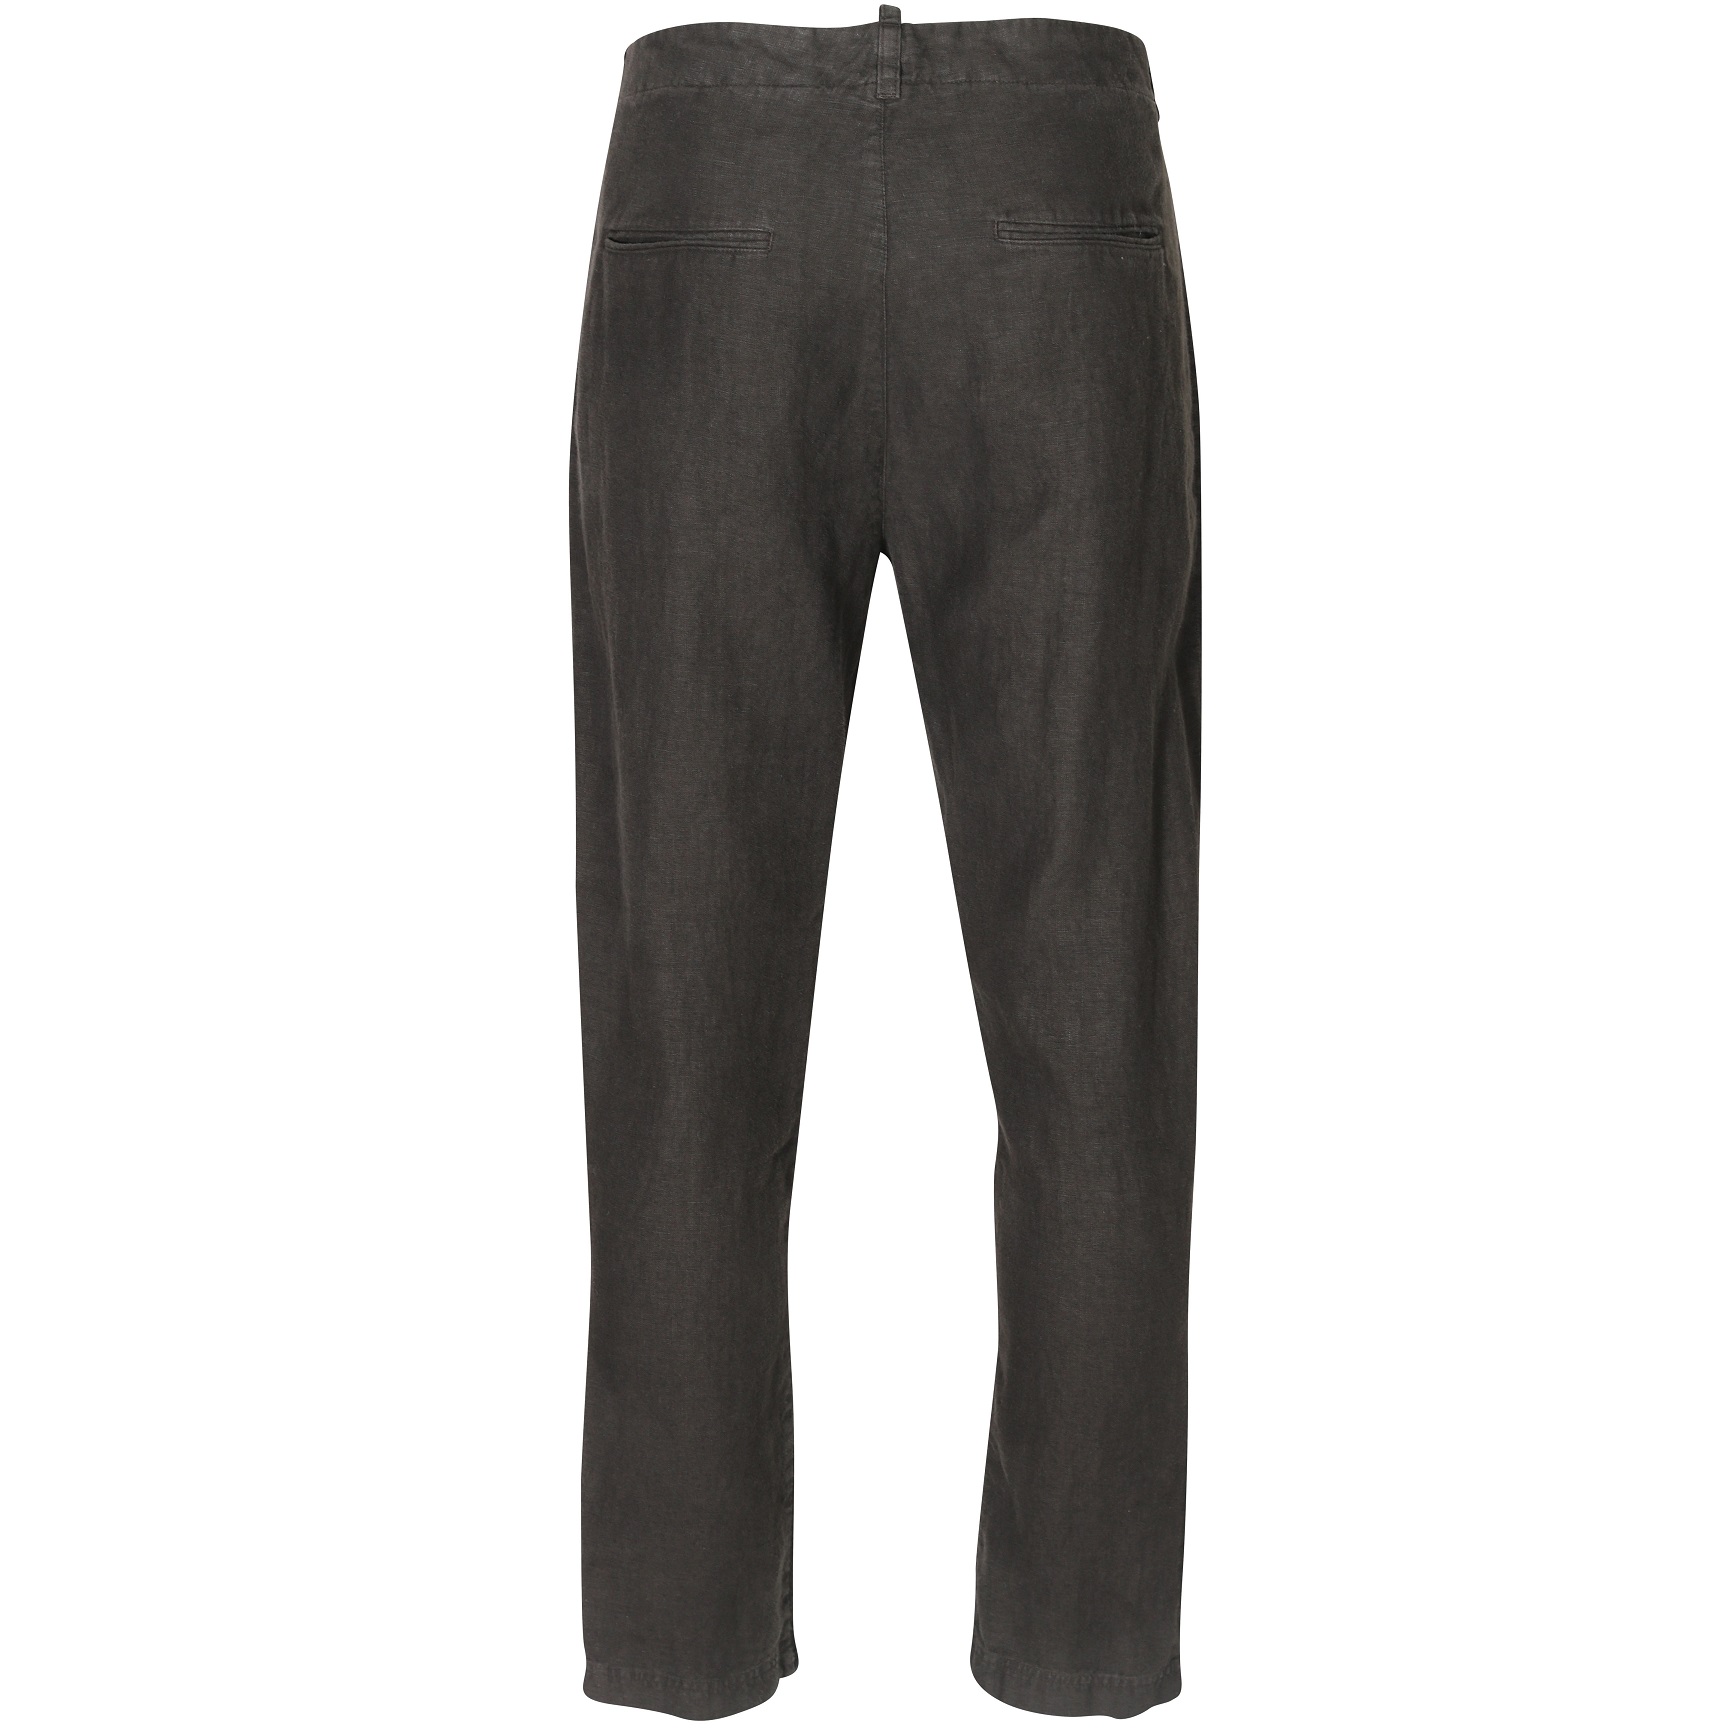 HANNES ROETHER Linen Pant in Dark Olive S